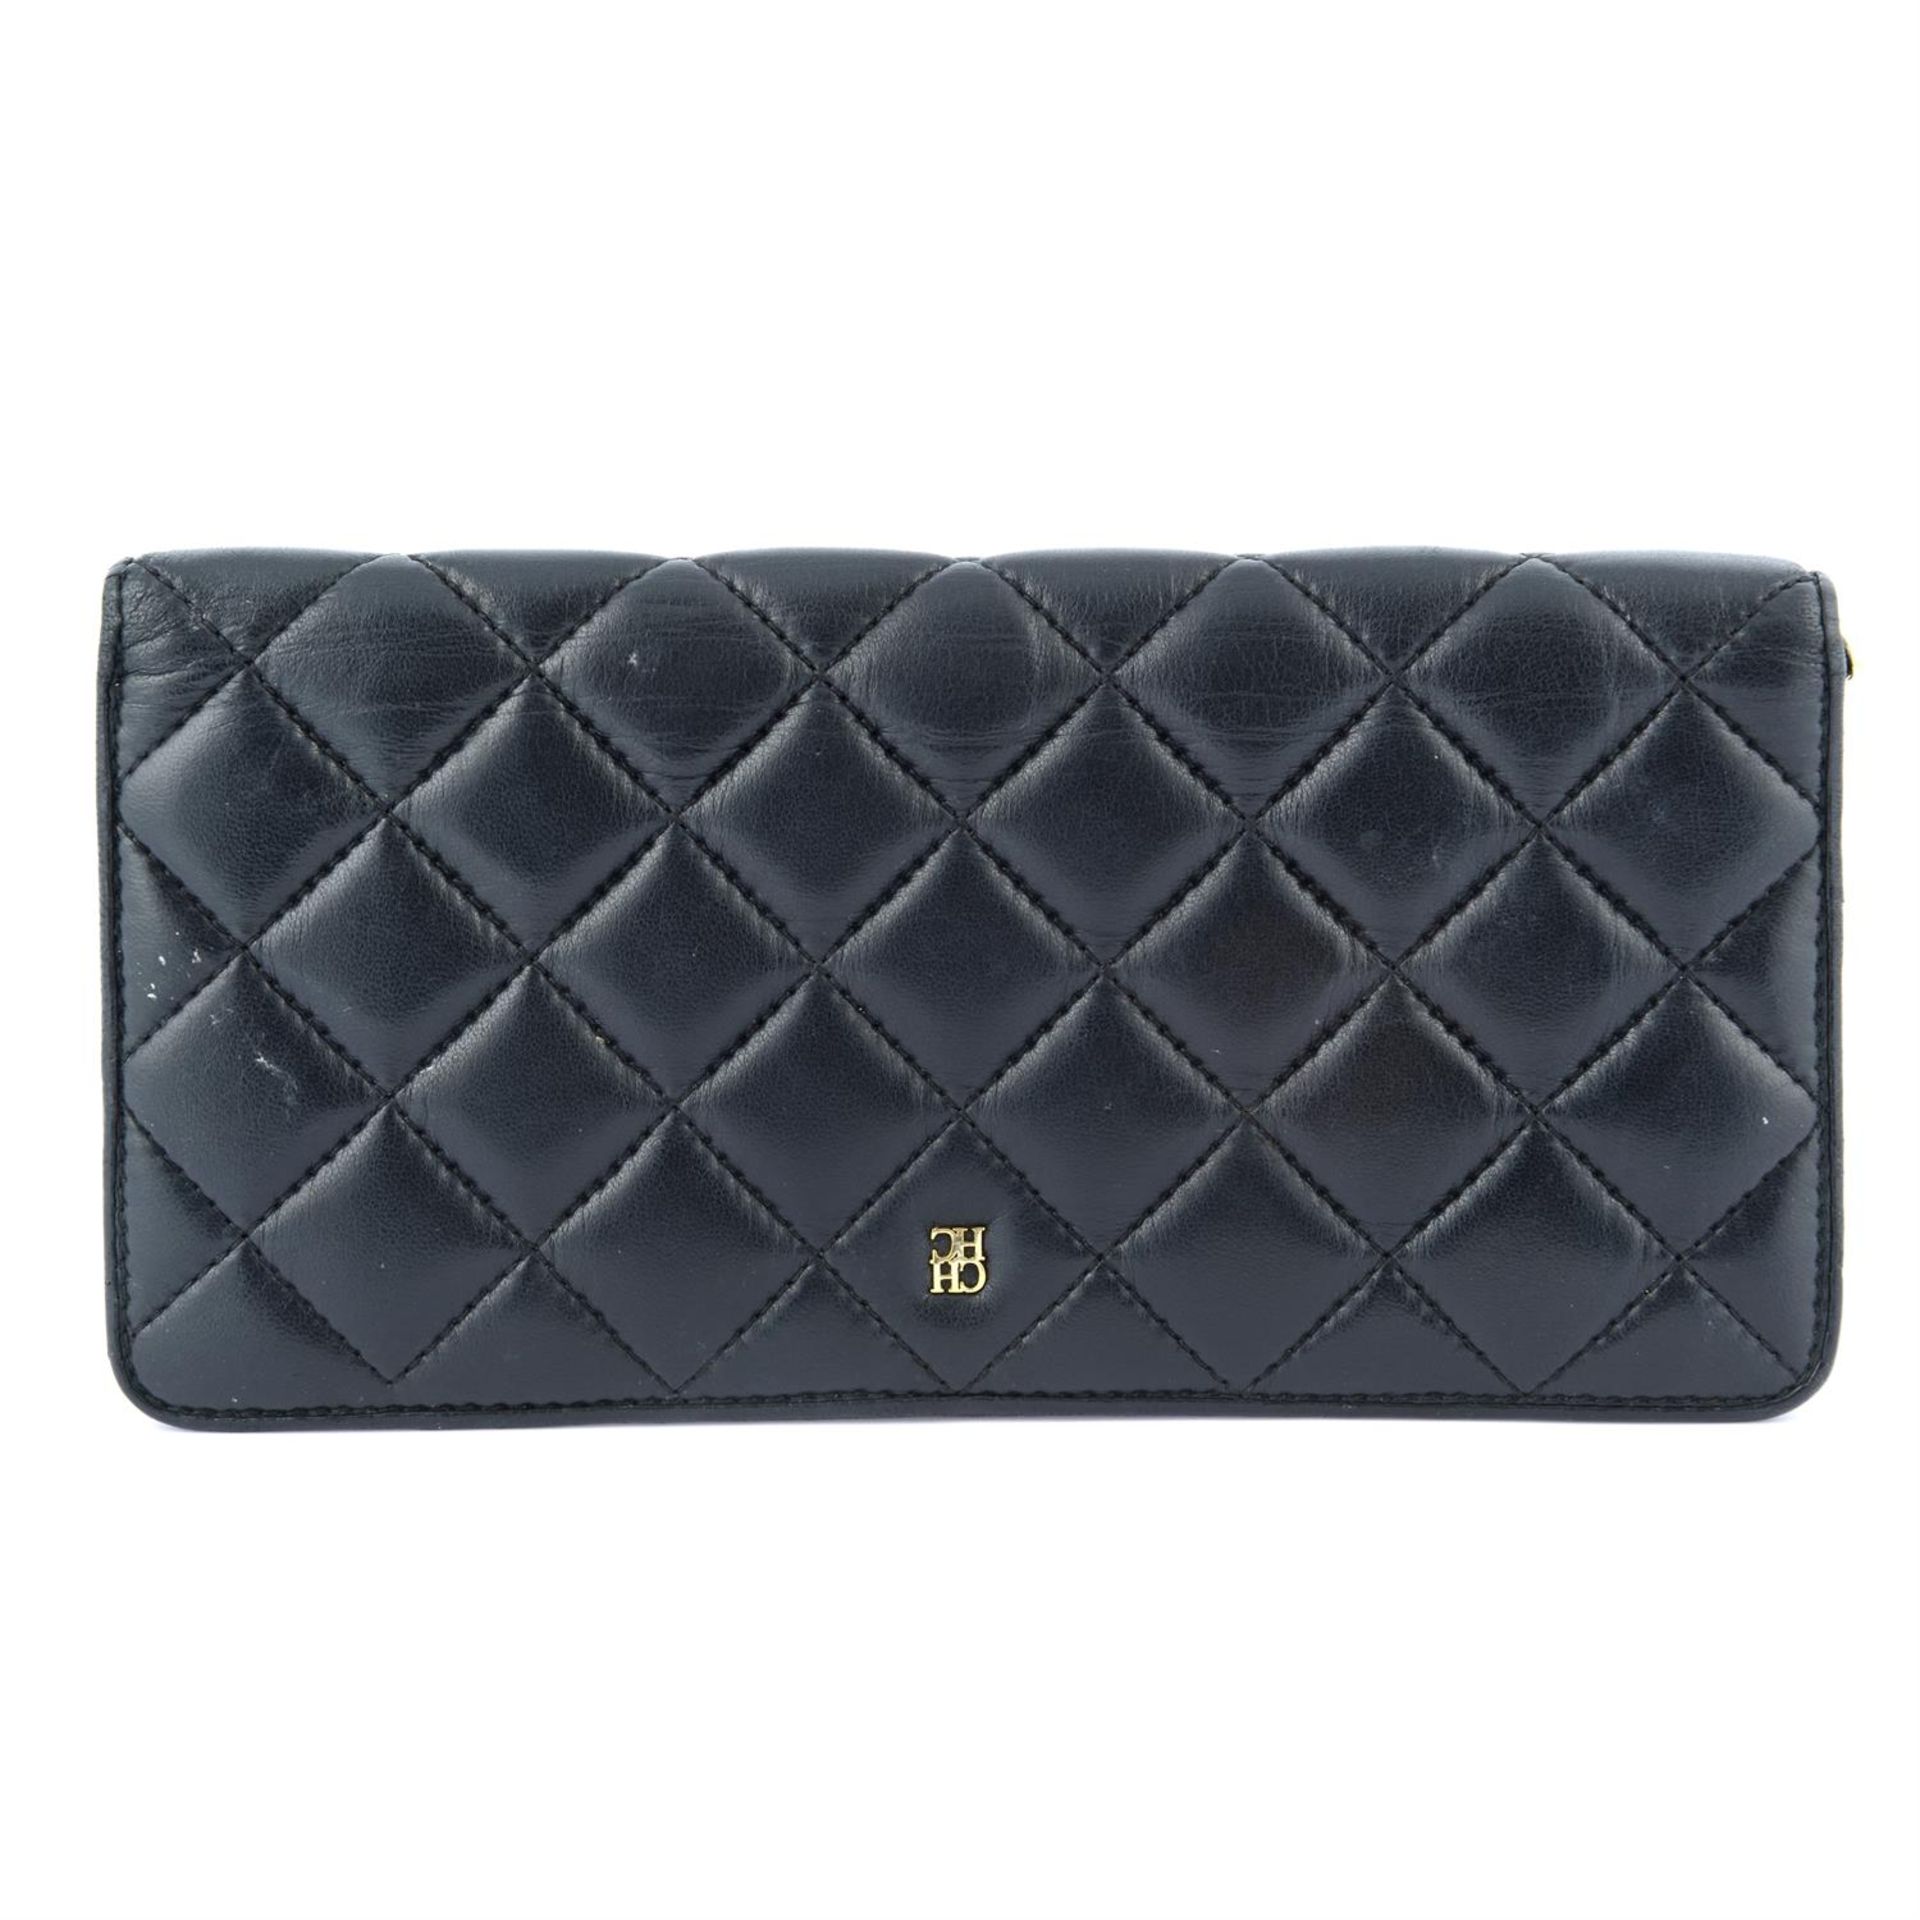 CAROLINA HERRERA - a black quilted leather wallet.